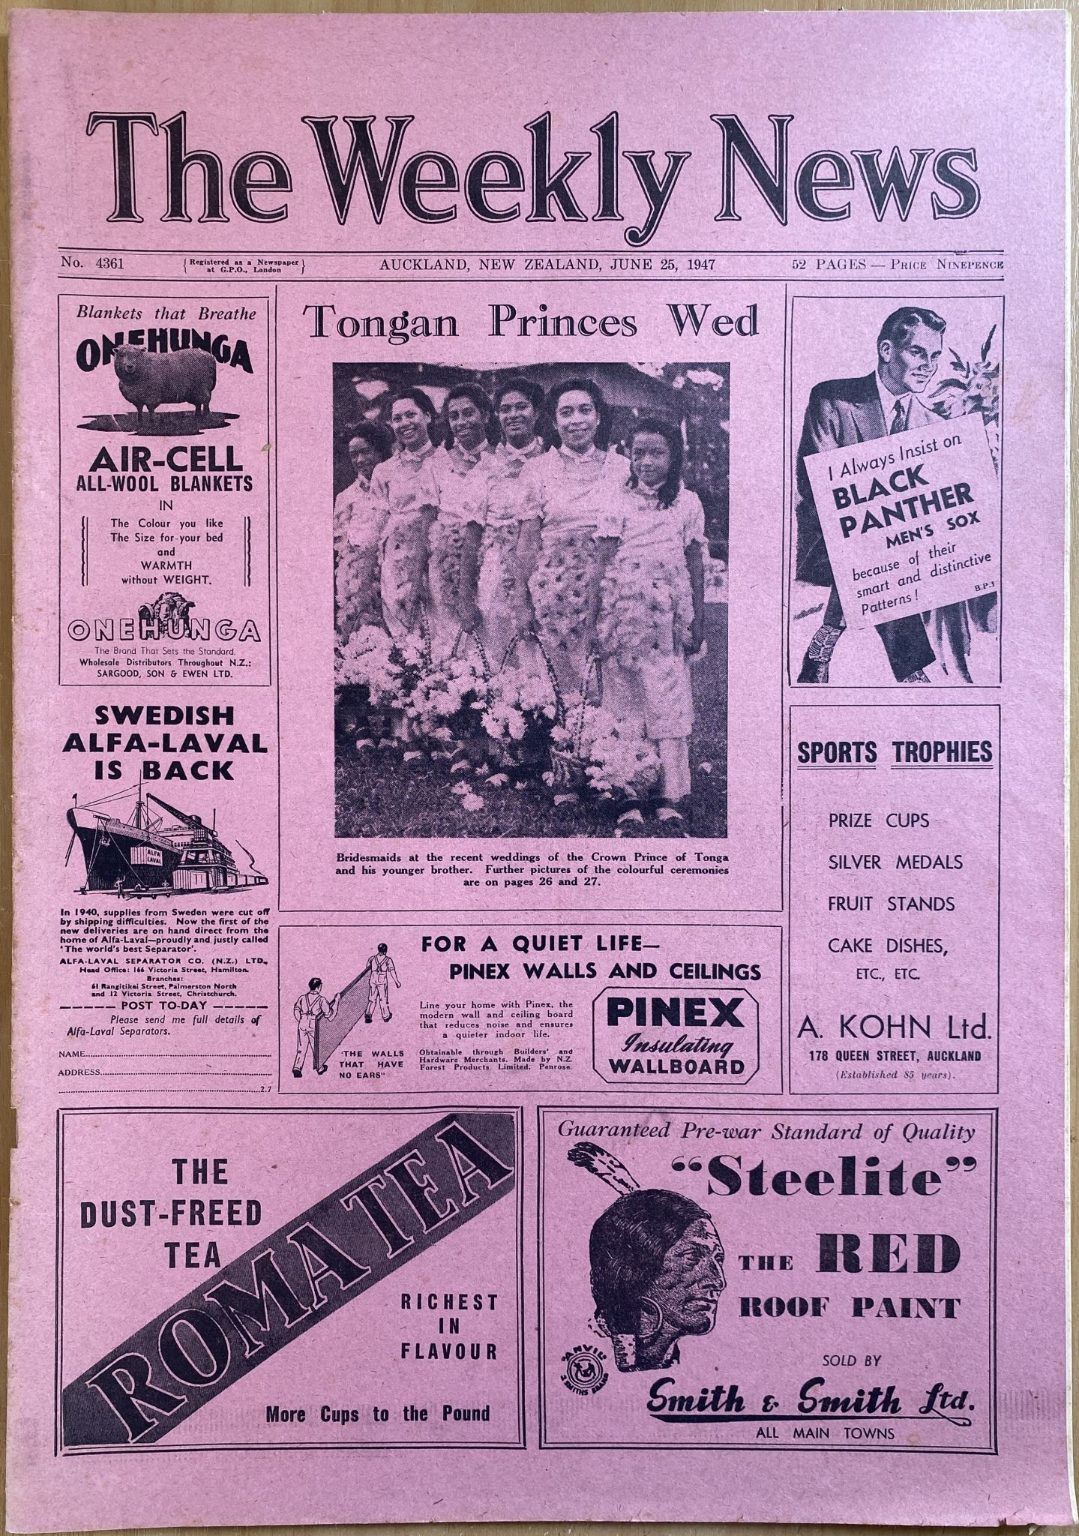 OLD NEWSPAPER: The Weekly News, No. 4361, 25 June 1947